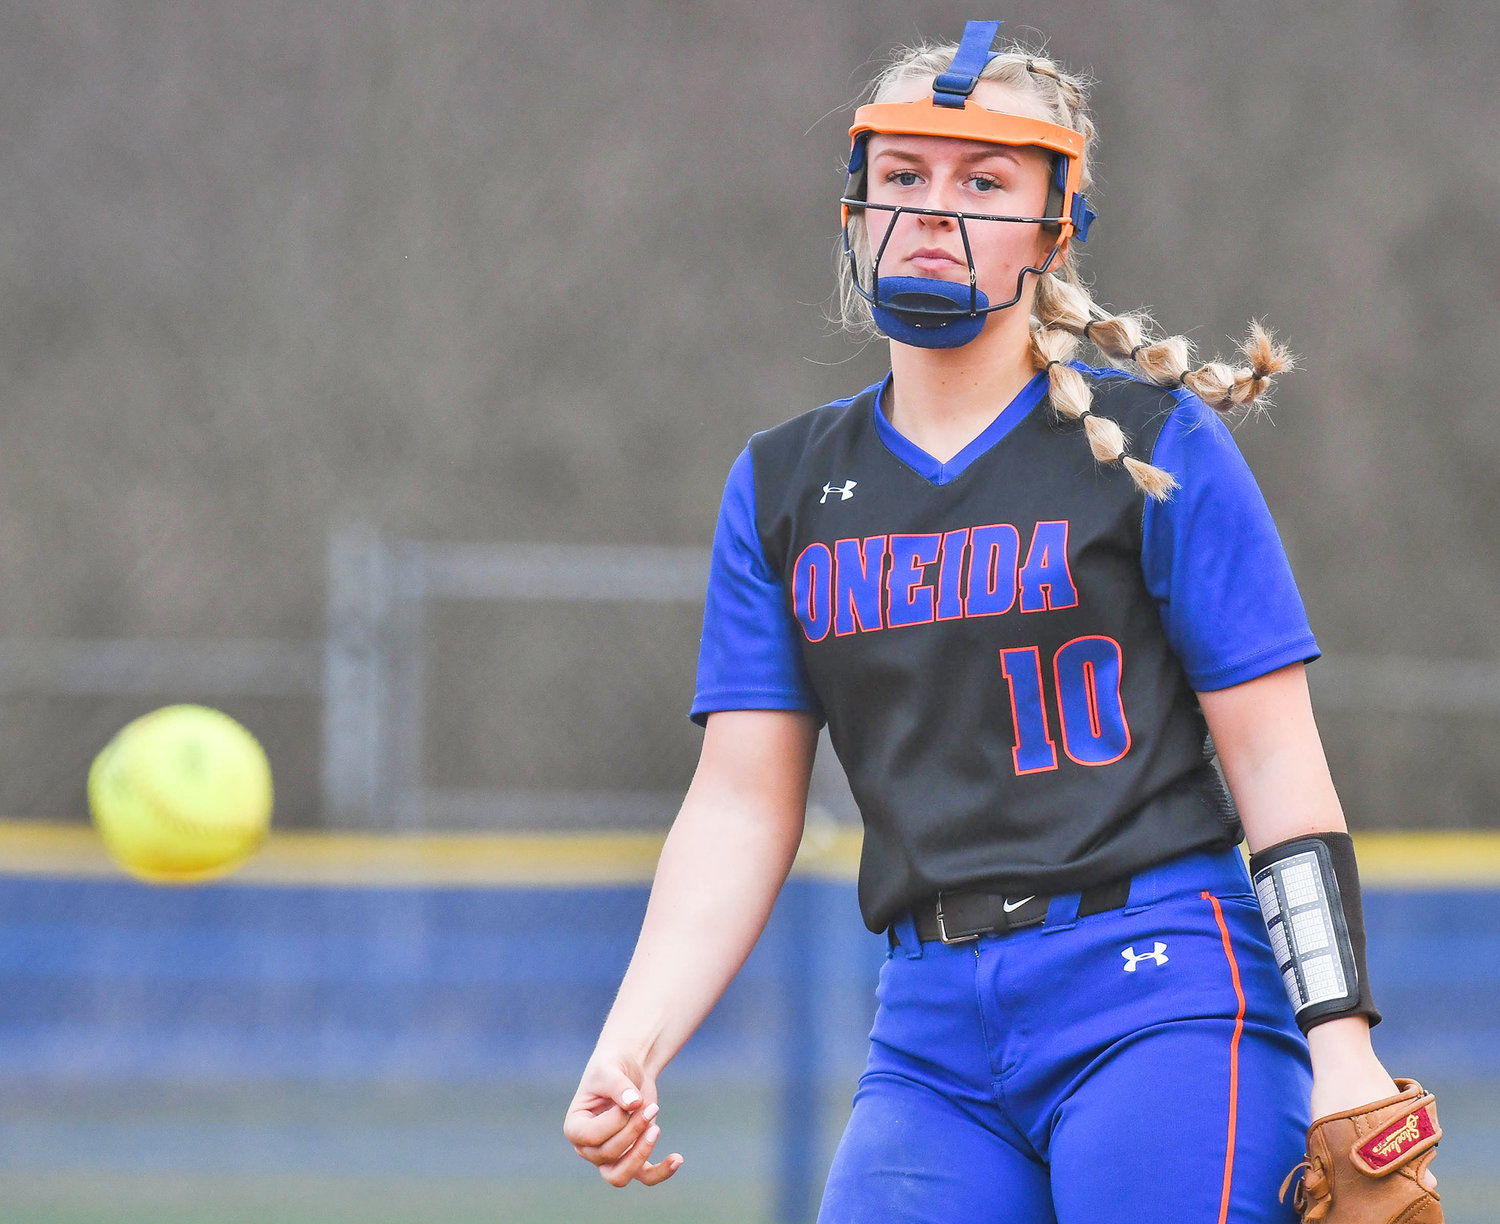 Oneida junior Kerrigan Crysler delivers a pitch in a game against Utica-Notre Dame earlier this season. Crysler won her second straight Tri-Valley League Pioneer Division pitcher of the year award.